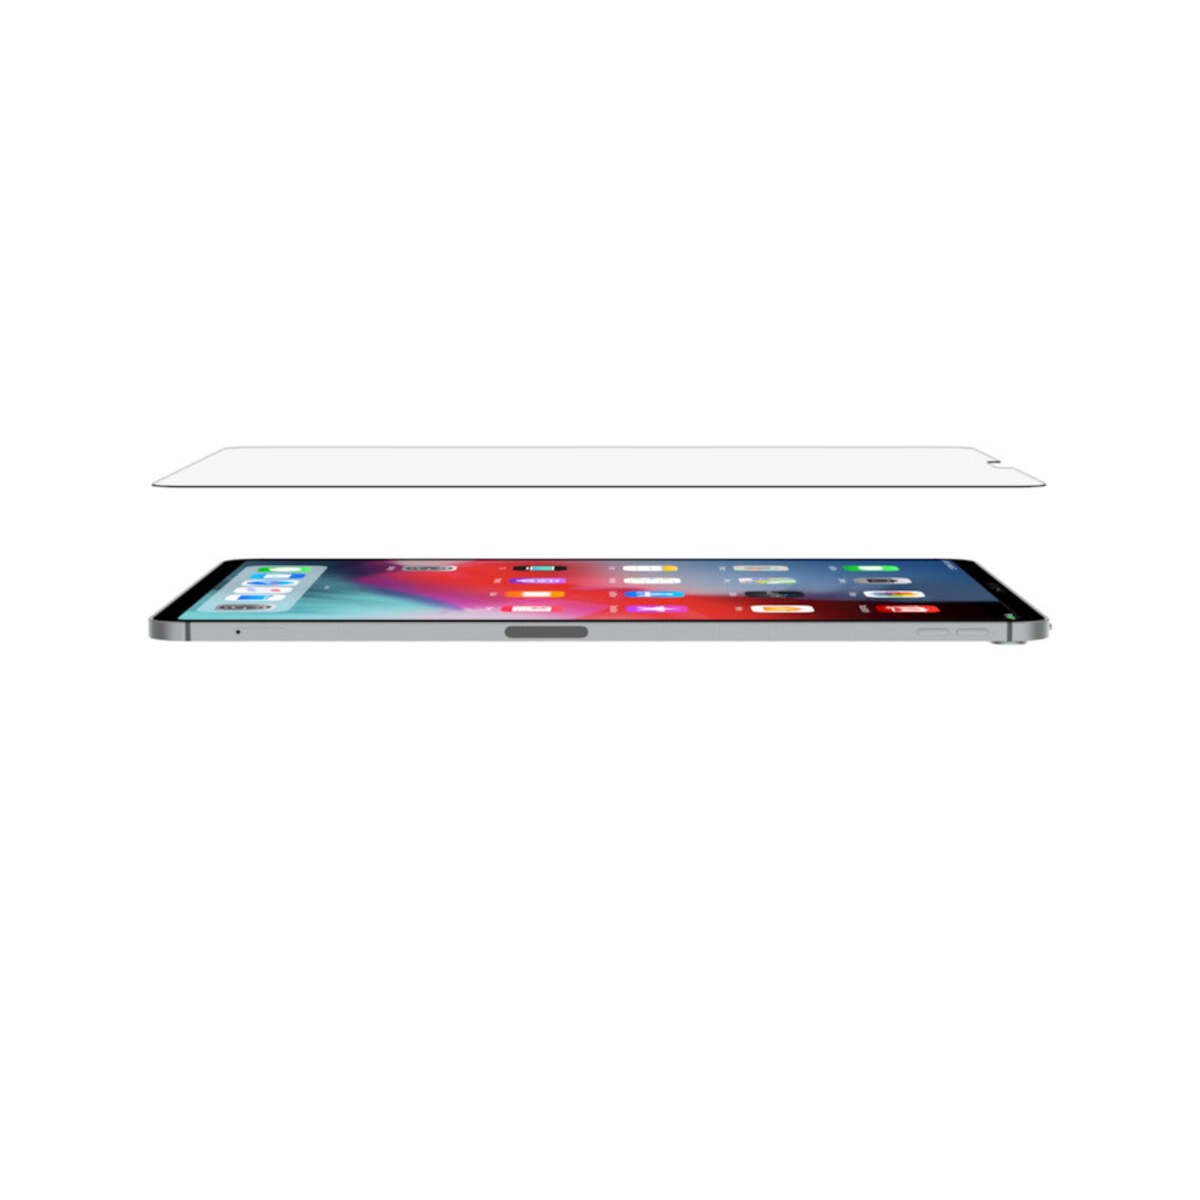 BELKIN Tempered Glass Screen Protection for iPad Pro 12.9 inch